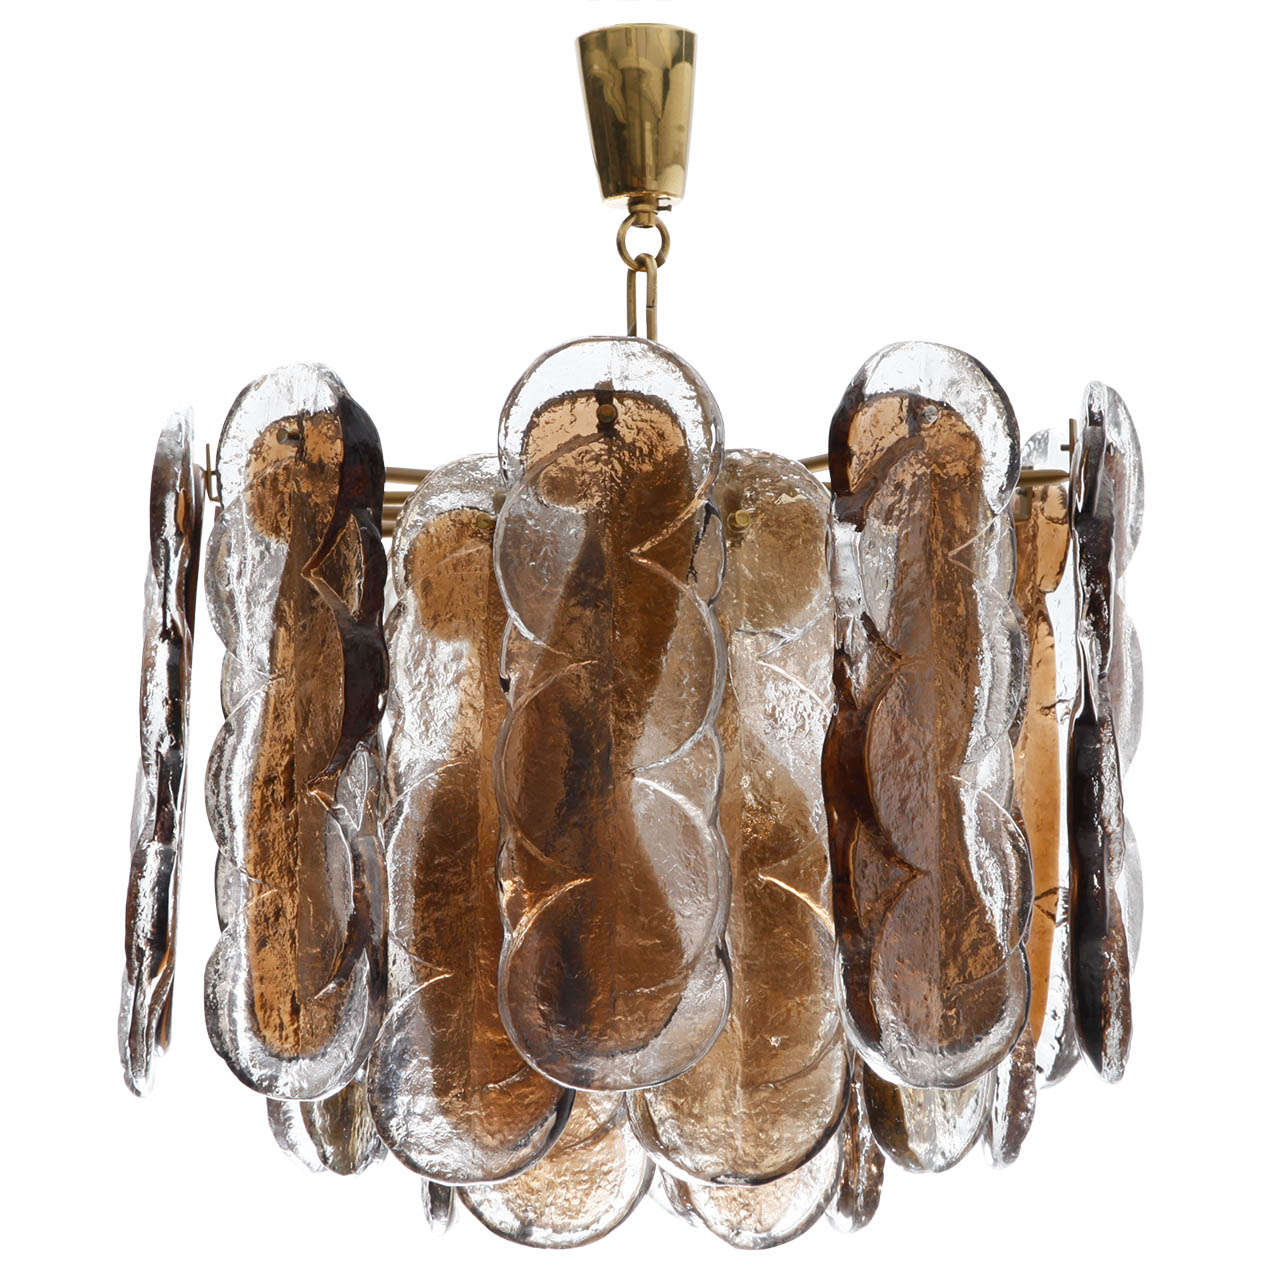 Chandelier by Kalmar, Large Murano 24 Thick Textured Swirl Iced Glass Panels